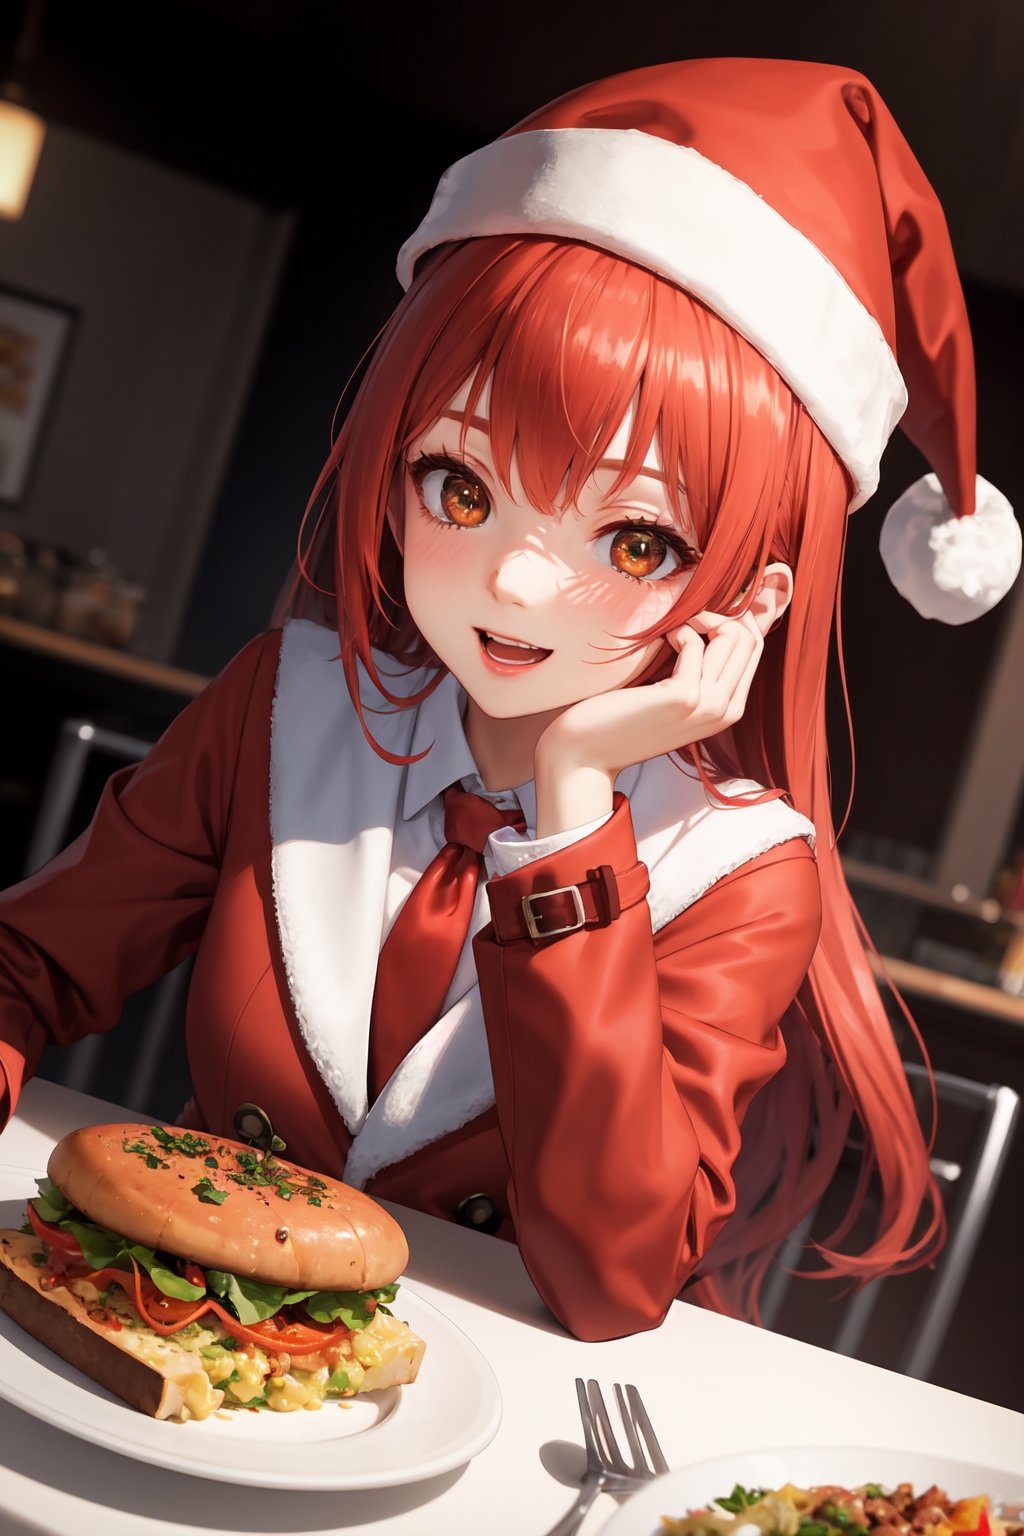 masterpiece, best quality, highly detailed, 8k, 1girl, petite, ginger long hair, glittering hazel eyes, {wearing whte shirt, red tie, red and white sneakers, red trench coat, santa hat}, (solo female), sitting, looking at freshly served food on the table in front of her, delightful, happy, close up